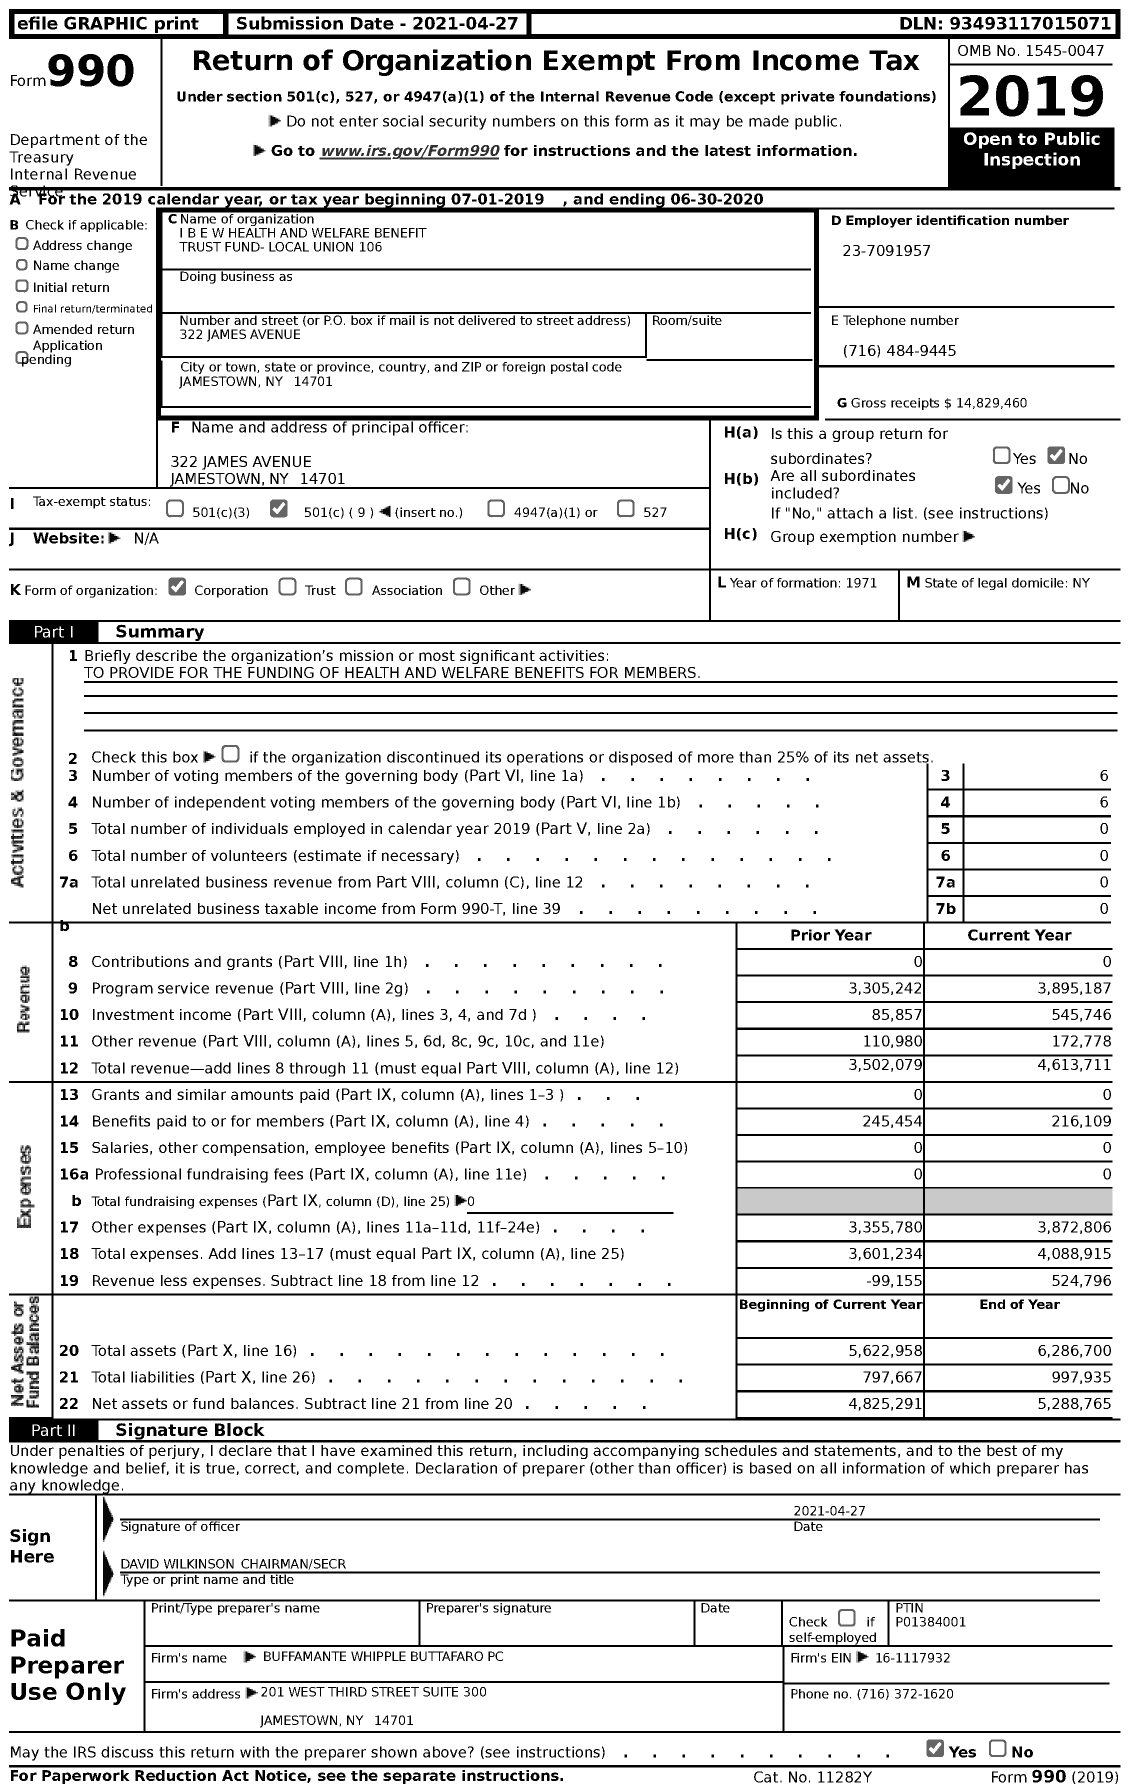 Image of first page of 2019 Form 990 for I B E W Health and Welfare Benefit Trust Fund- Local Union 106